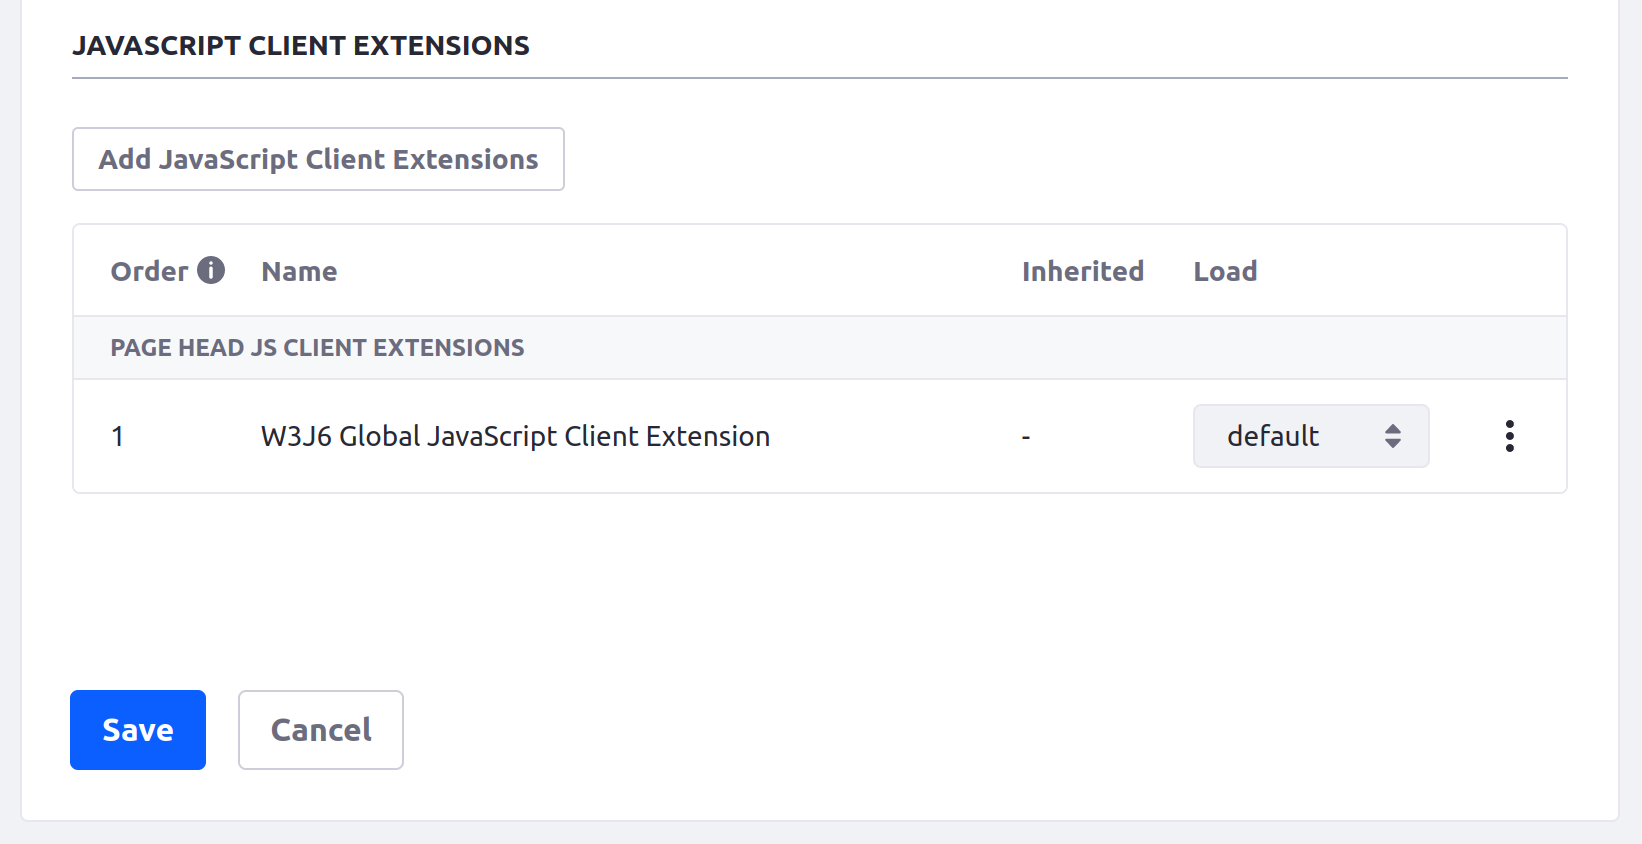 Add the JavaScript client extension. It appears in a list depending on whether you added it to the page head or page bottom.